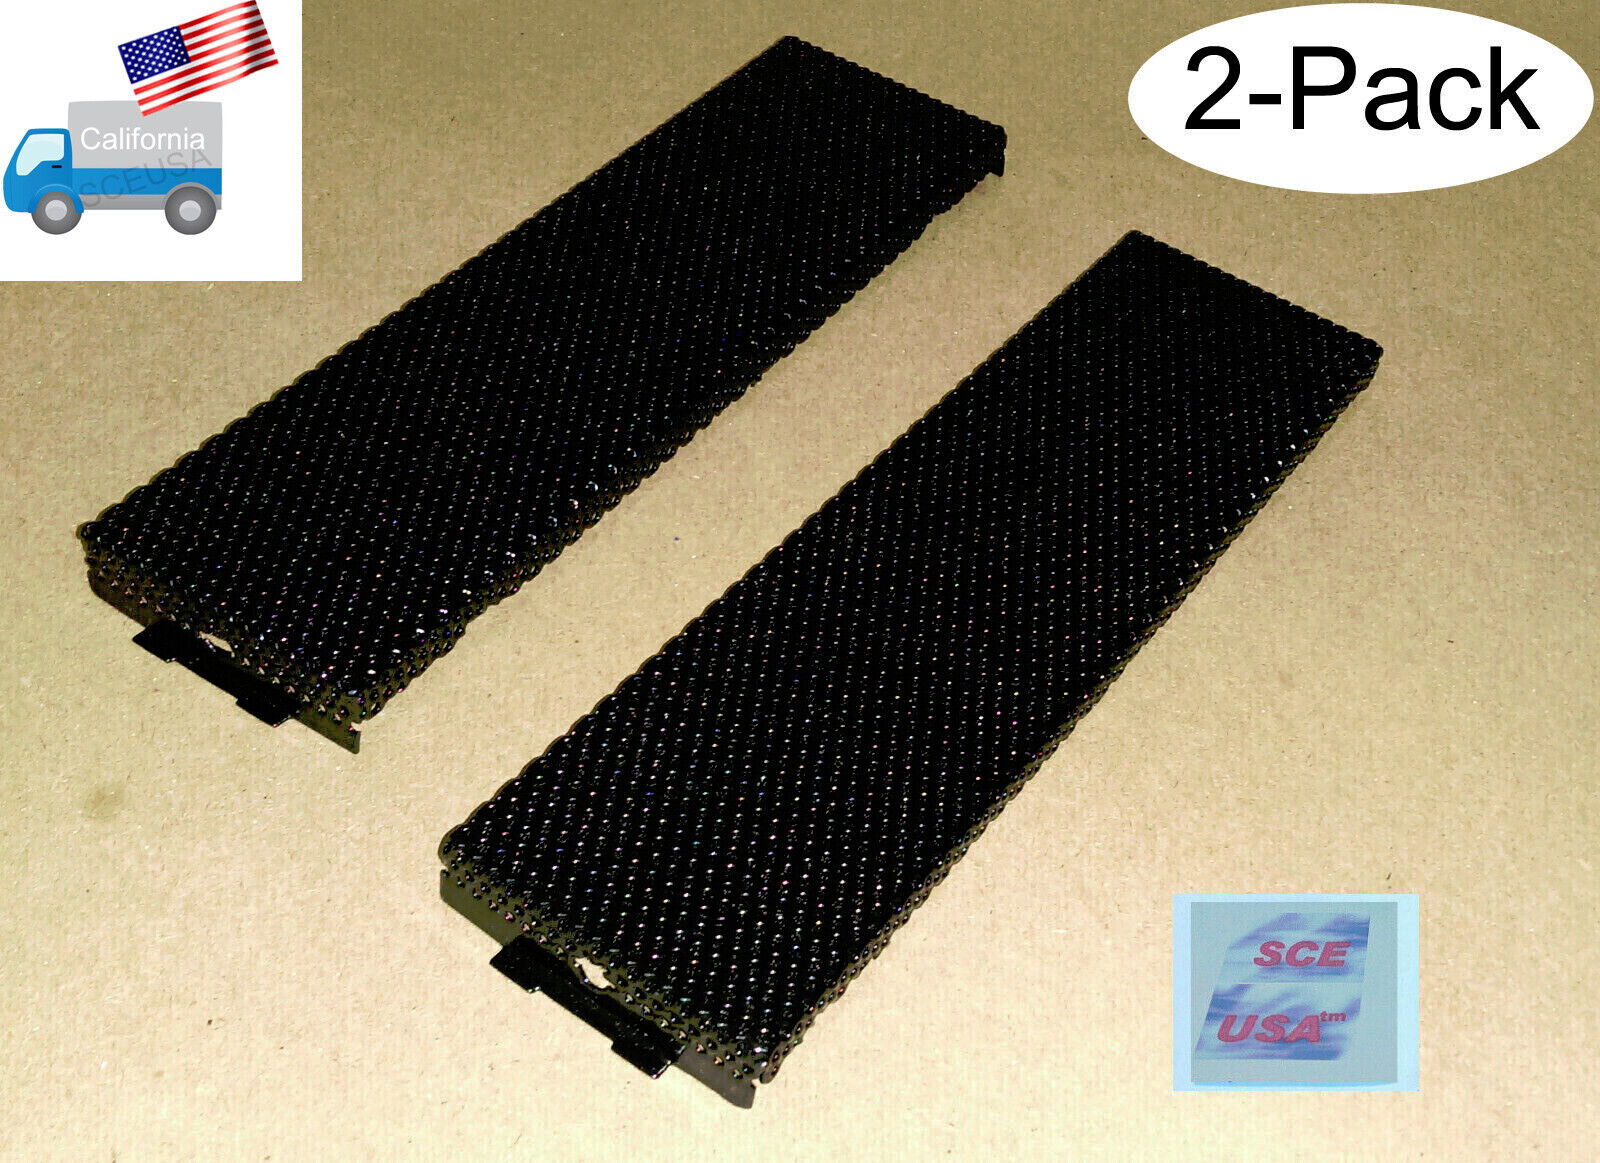 2-pack: Universal PC Tower Perforated Mesh Metal 5.25